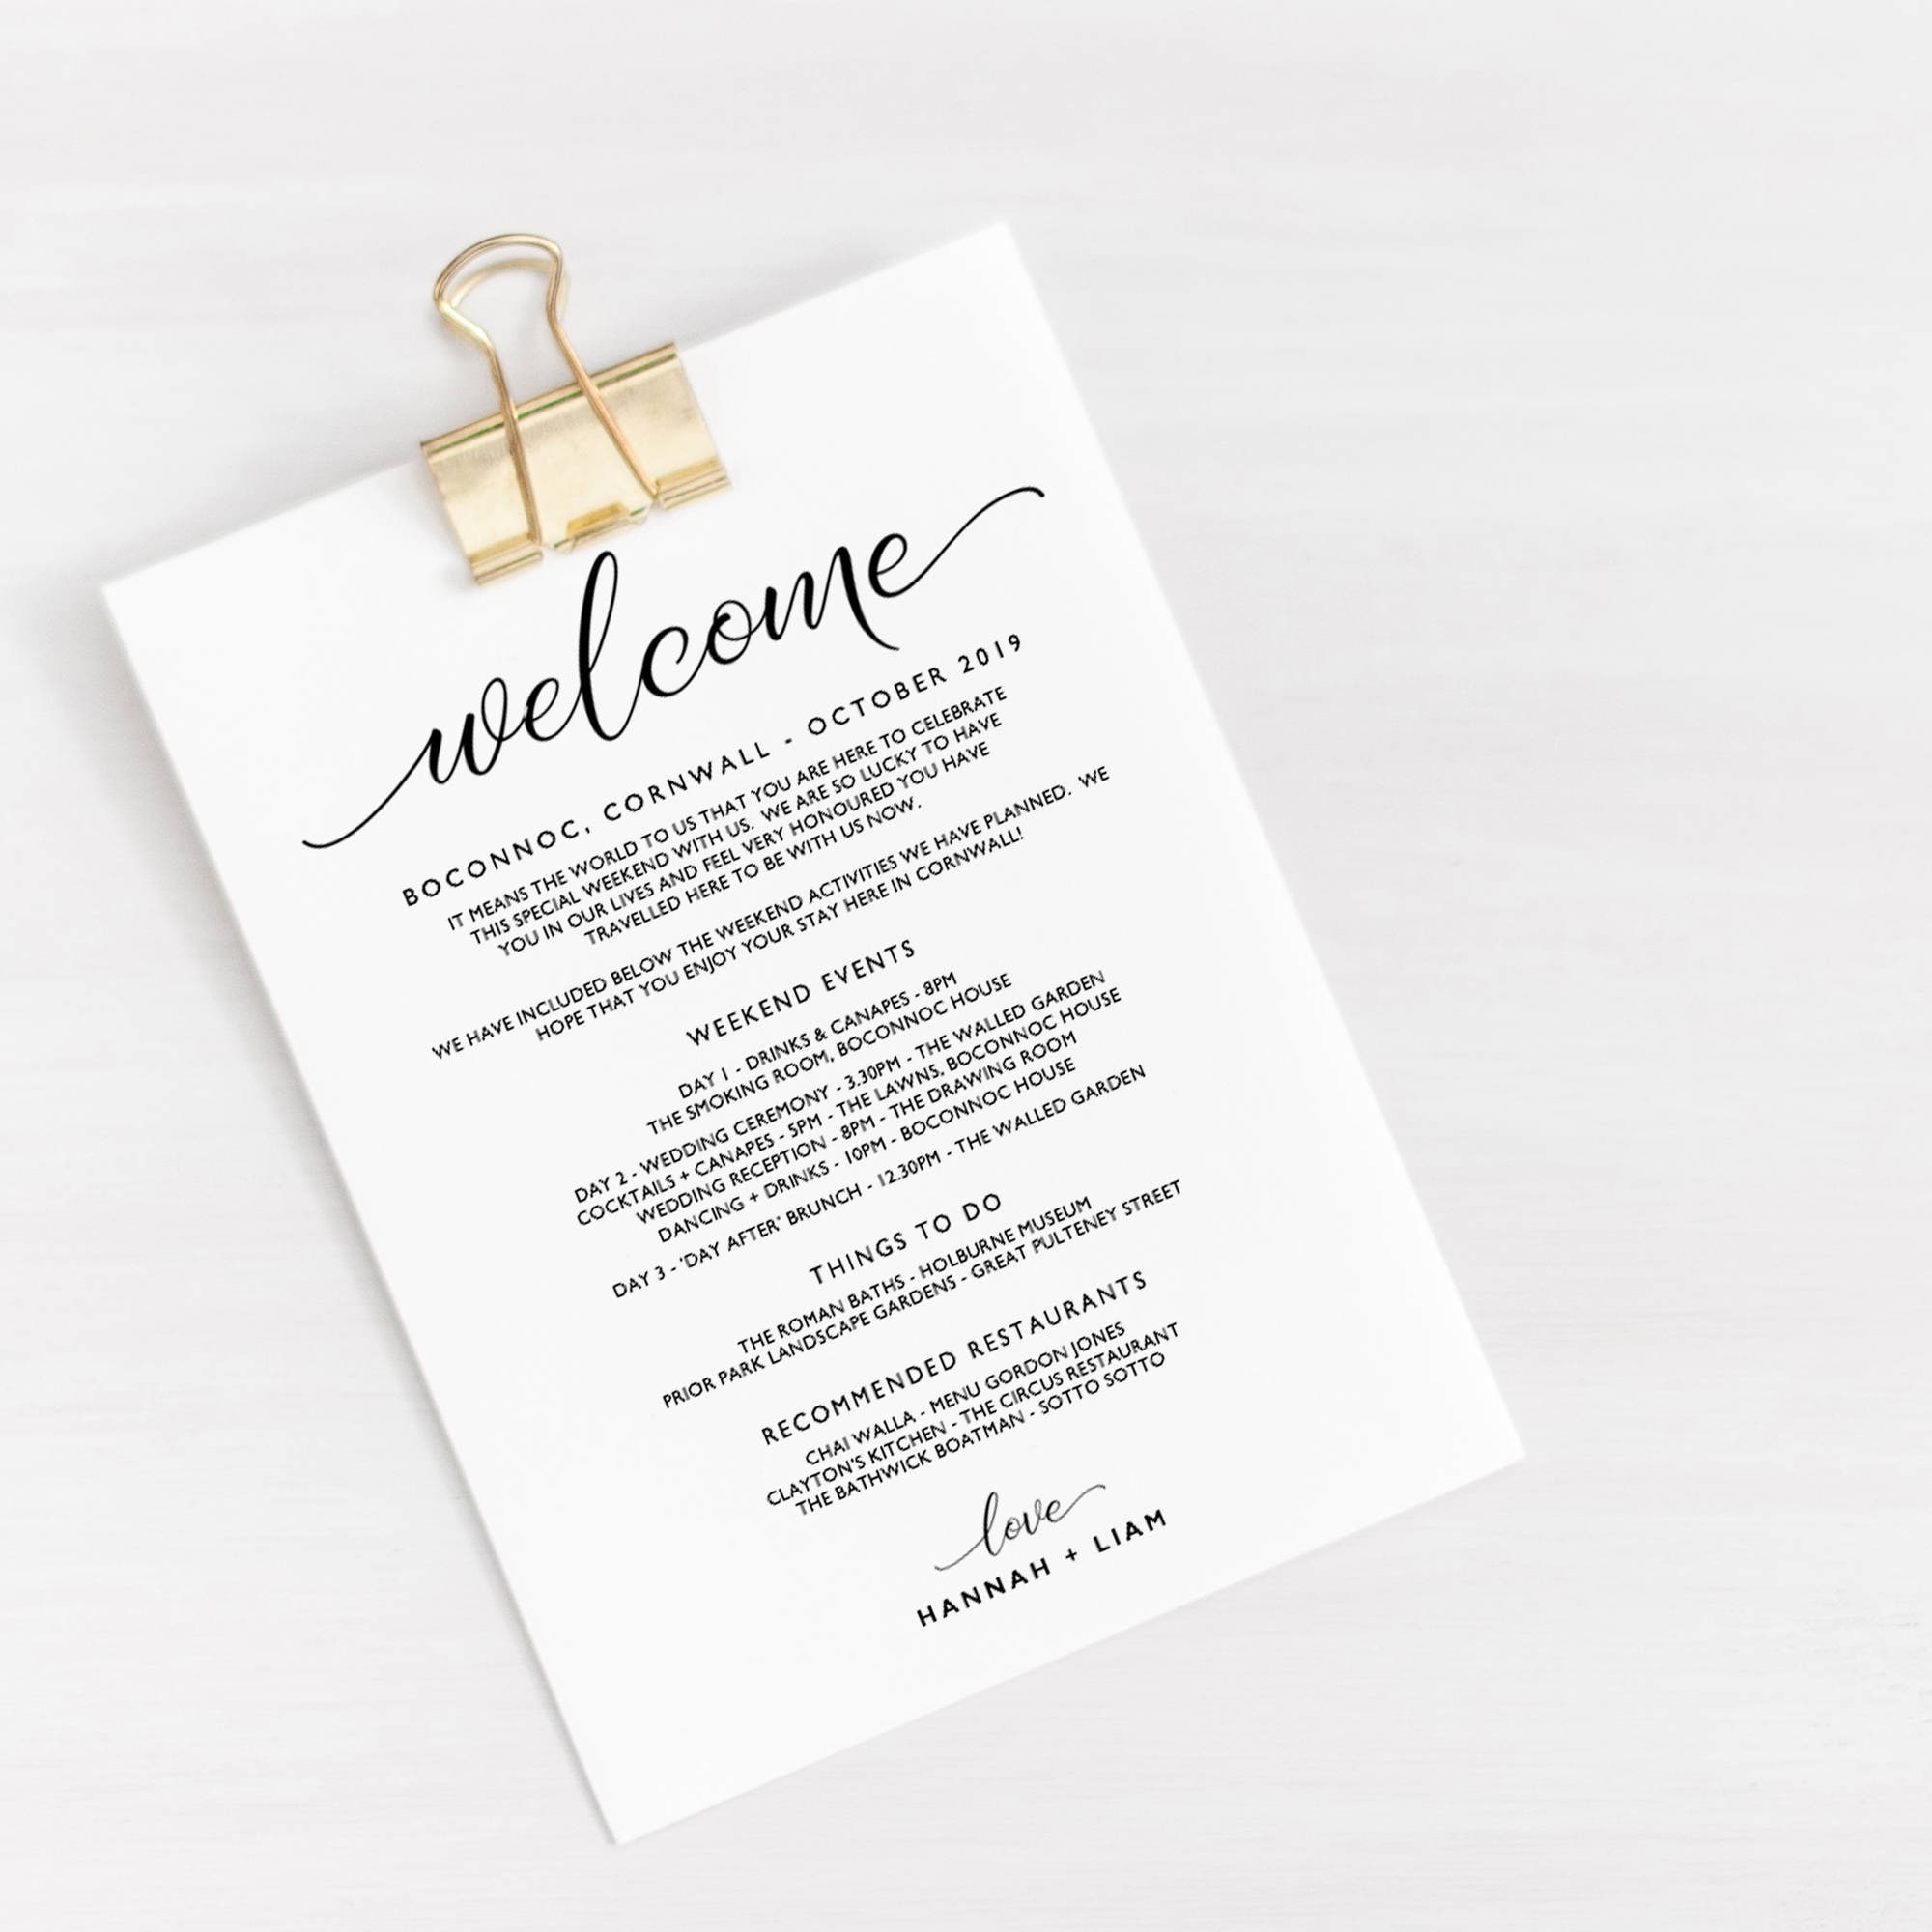 Wedding Welcome Itinerary Template Editable Wedding  Etsy pertaining to Wedding Welcome Itinerary Template